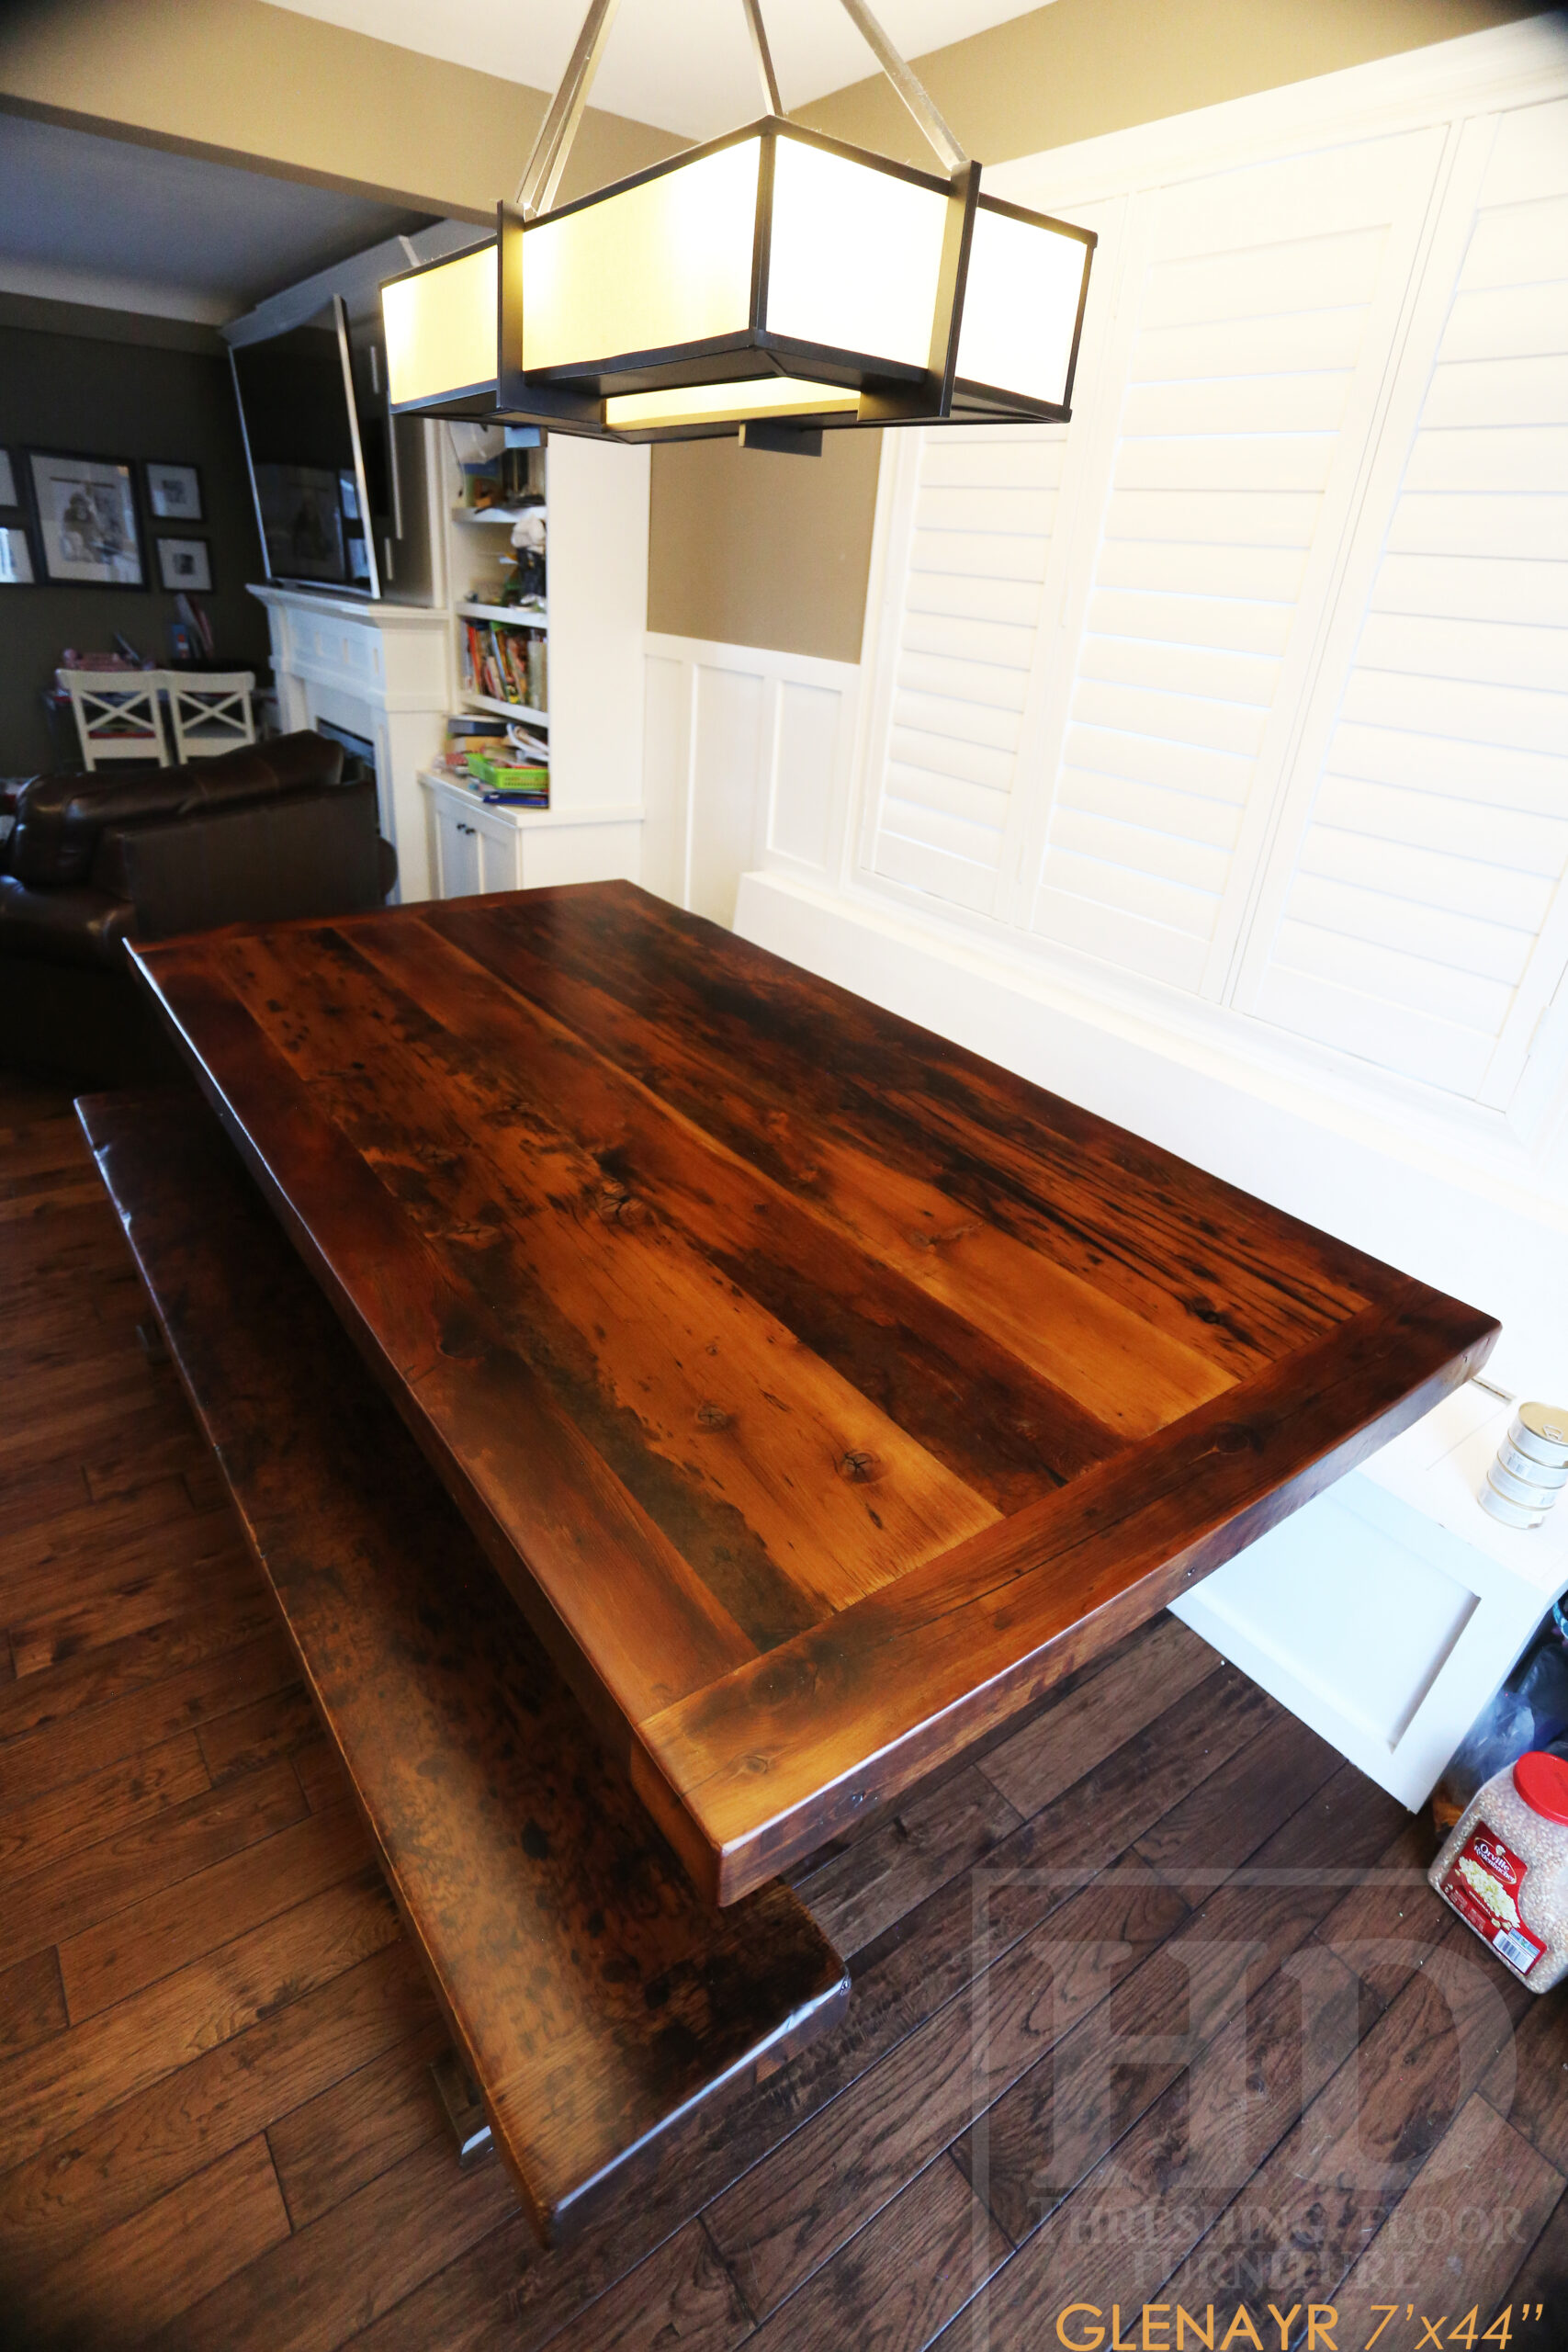 Project details: 7' Reclaimed Ontario Barnwood Table we made for a Welland, Ontario home - 44" wide – Beam Option Sawbuck Base – Extra Thick 3” Joist Material Top - Reclaimed Old Growth Hemlock Threshing Floor Construction – Bread edge Ends - Original edges & distressing maintained - Premium epoxy + satin polyurethane finish – 7’ [matching] Trestle Bench – 2 Strongback Chairs / Wormy Maple / Polyurethane Clearcoat Finish - www.table.ca